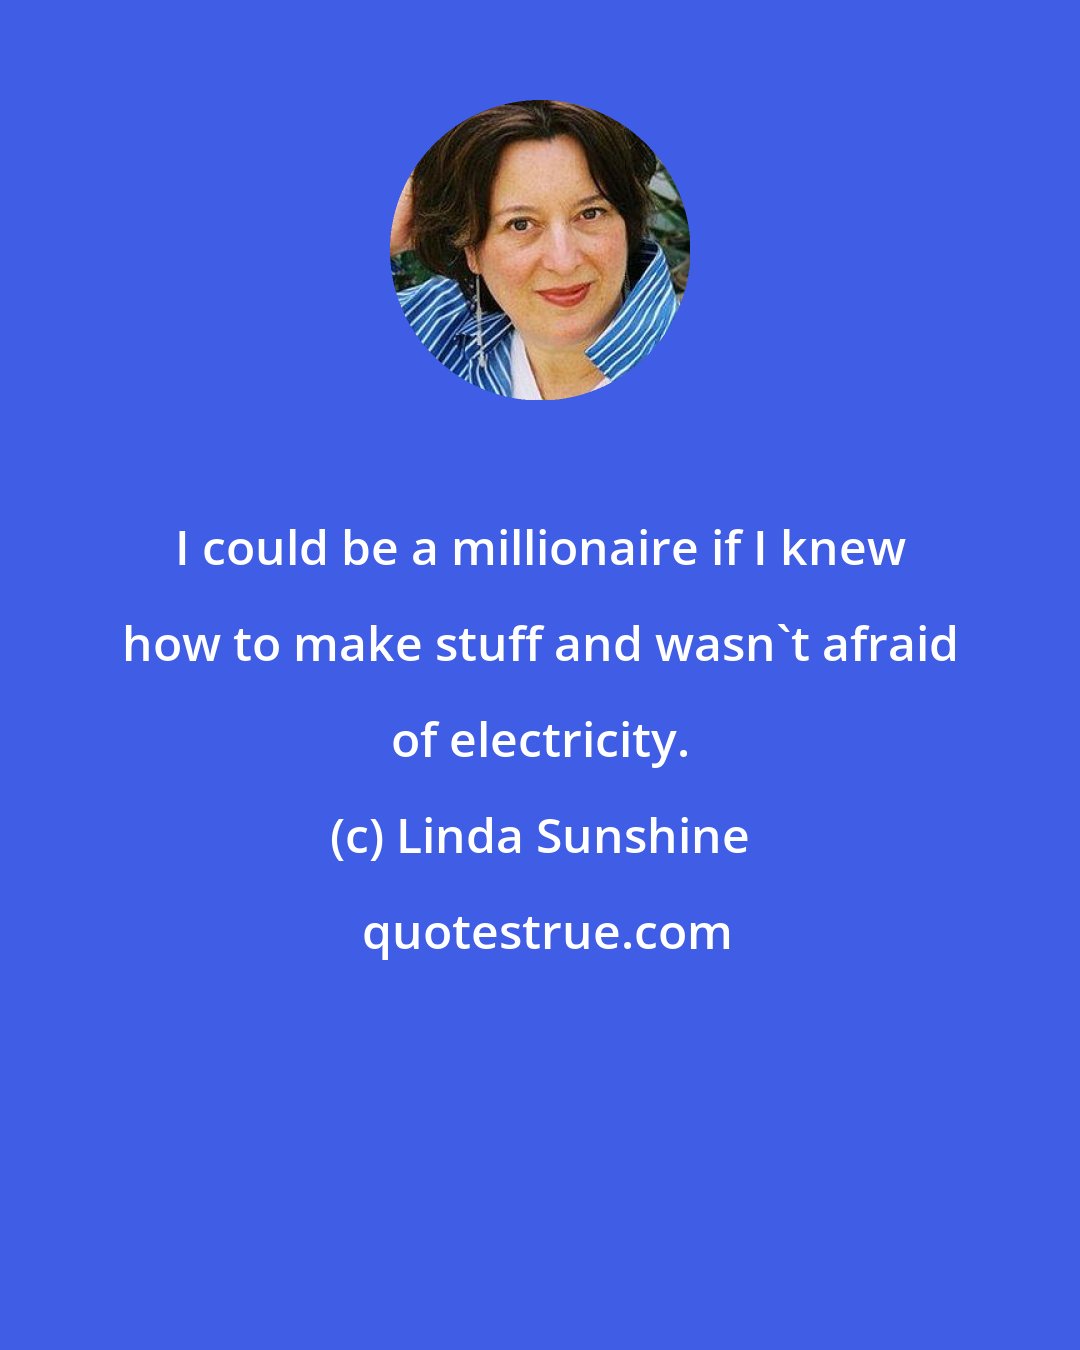 Linda Sunshine: I could be a millionaire if I knew how to make stuff and wasn't afraid of electricity.